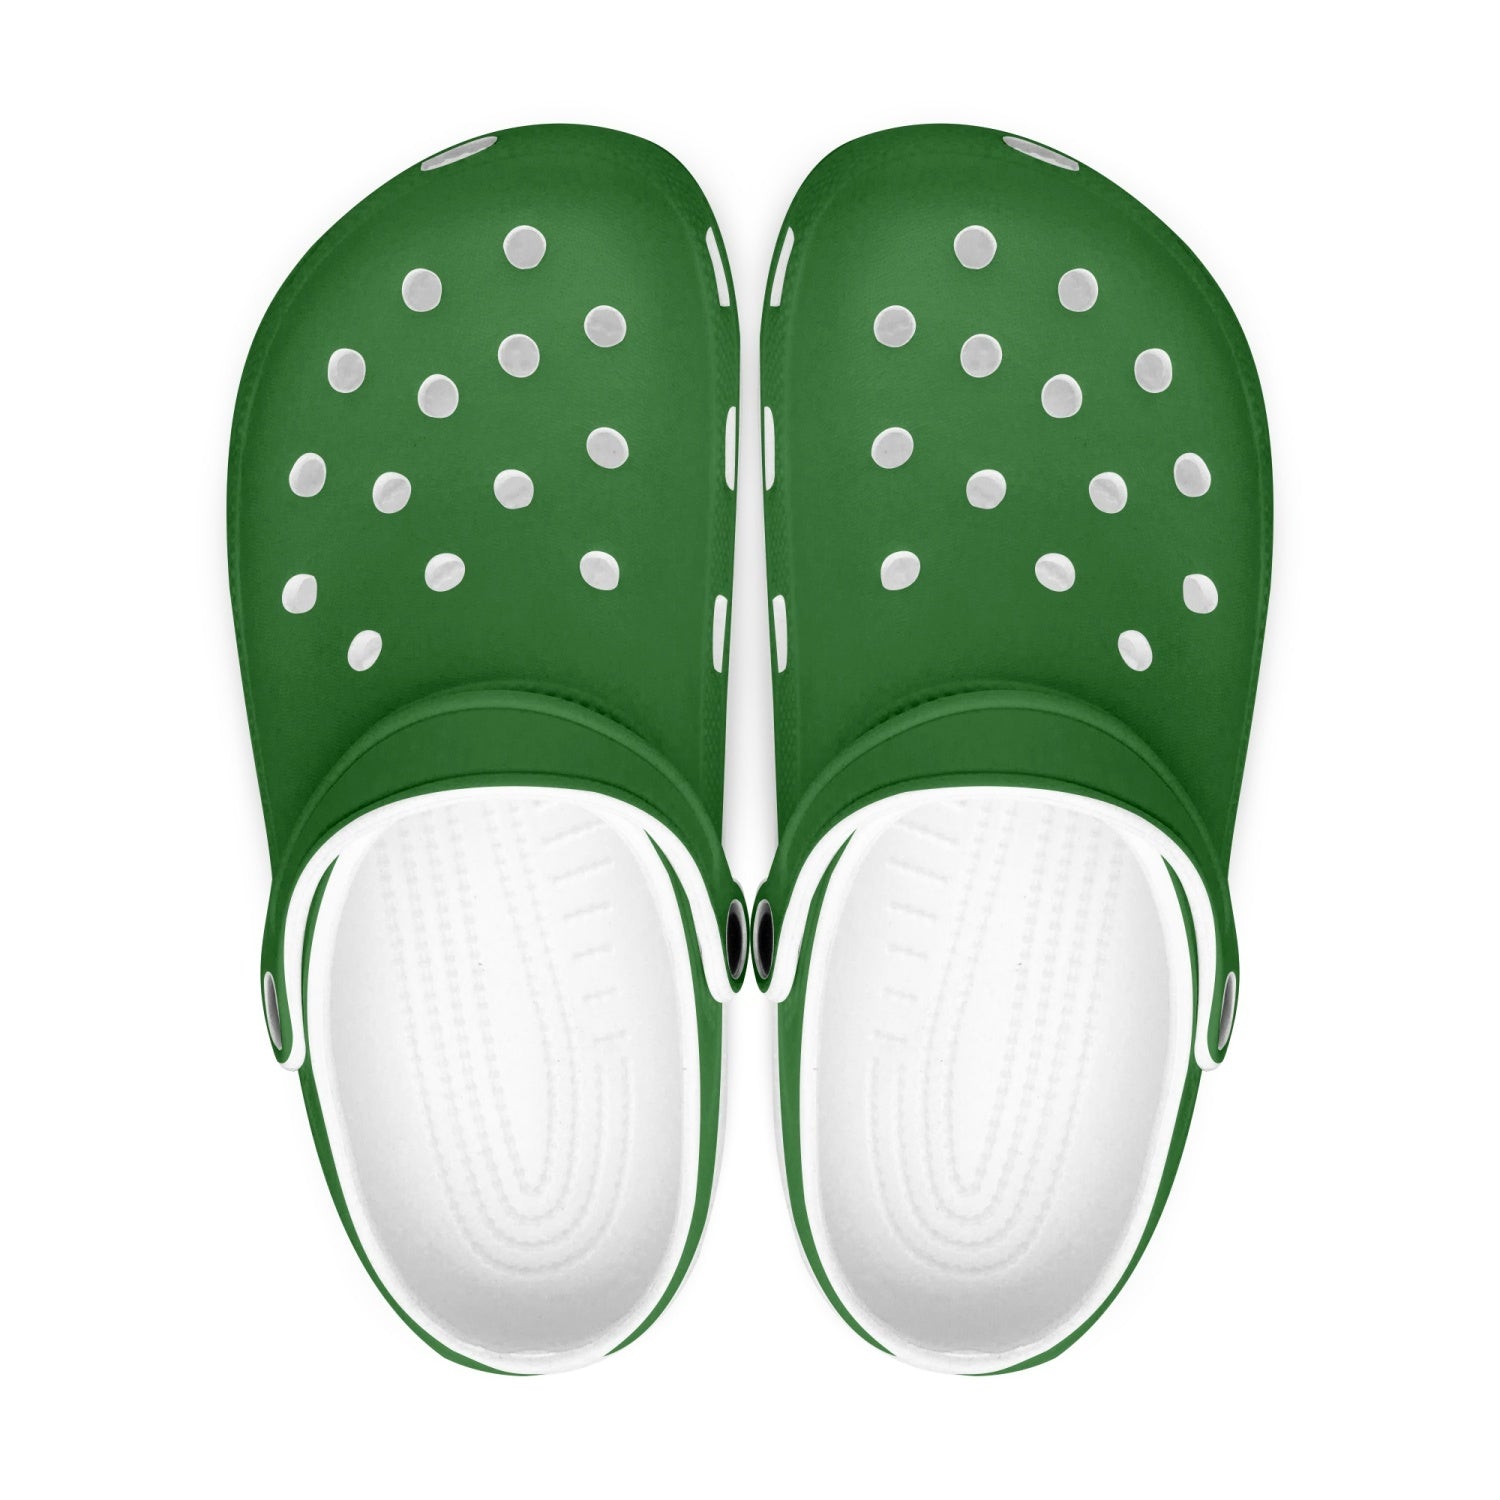 Pine Green Color Unisex Clogs, Best Solid Green Color Classic Solid Color Printed Adult's Lightweight Anti-Slip Unisex Extra Comfy Soft Breathable Supportive Clogs Flip Flop Pool Water Beach Slippers Sandals Shoes For Men or Women, Men's US Size: 3.5-12, Women's US Size: 4-12